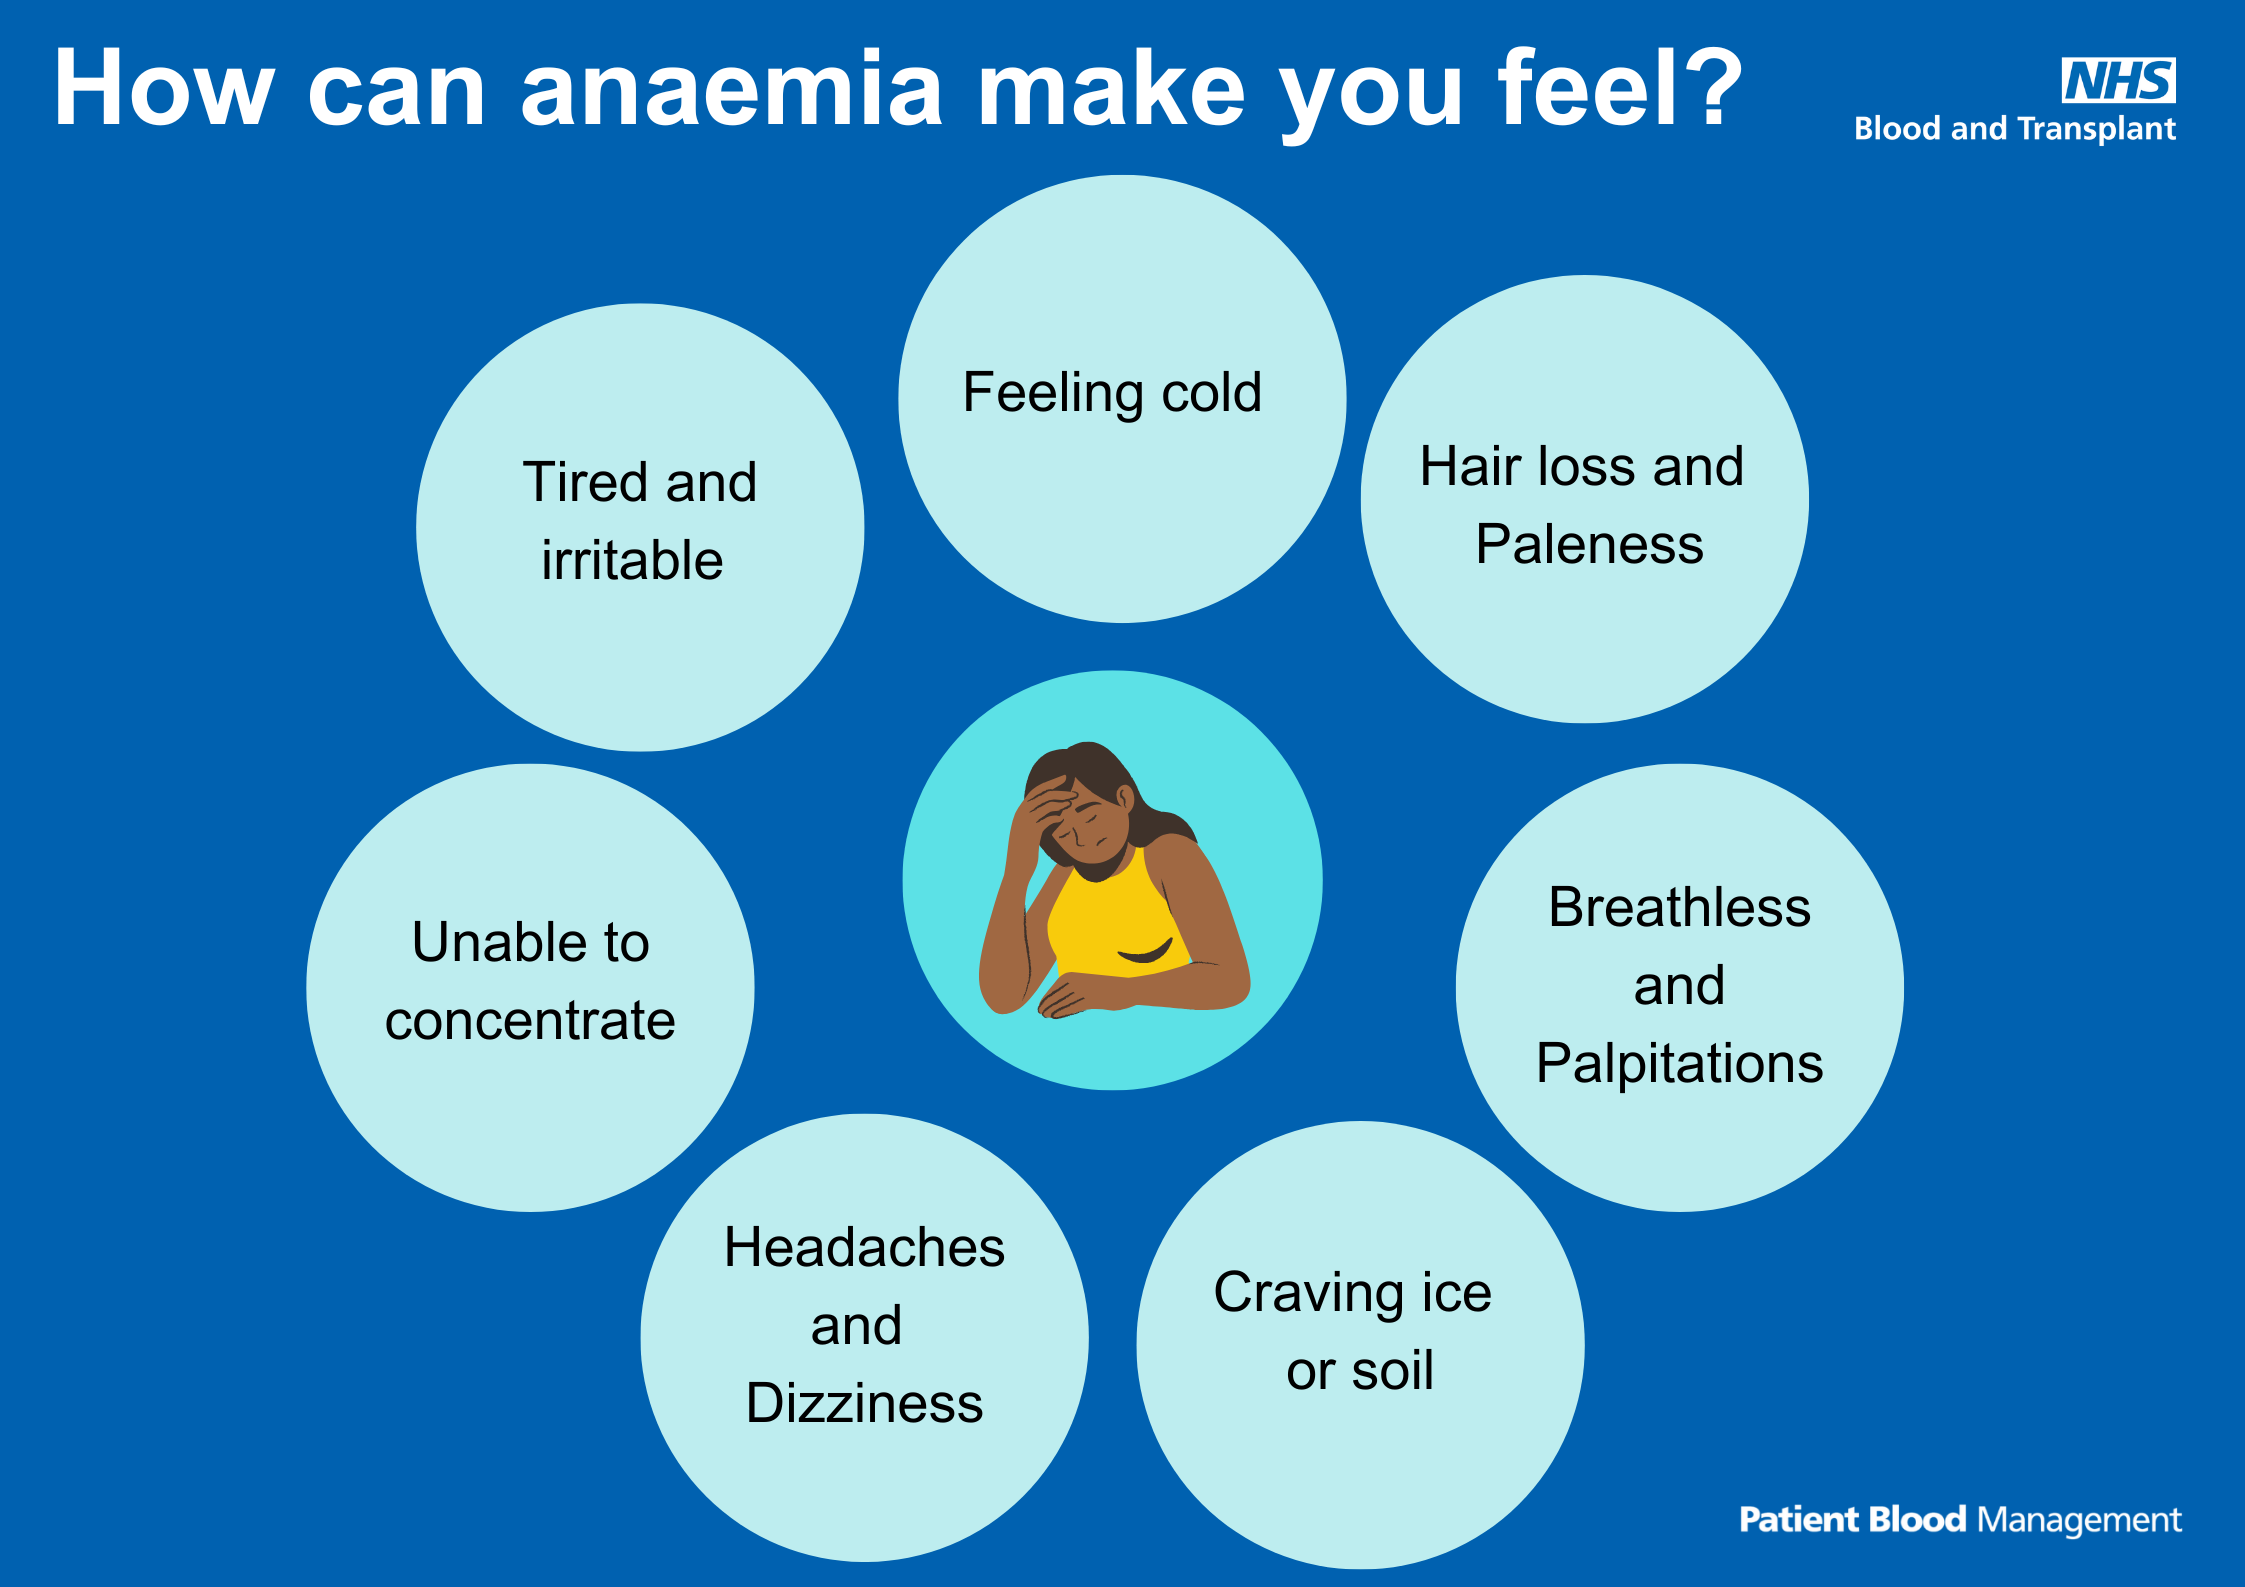 How can anaemia make you feel infographic - scroll down for word version